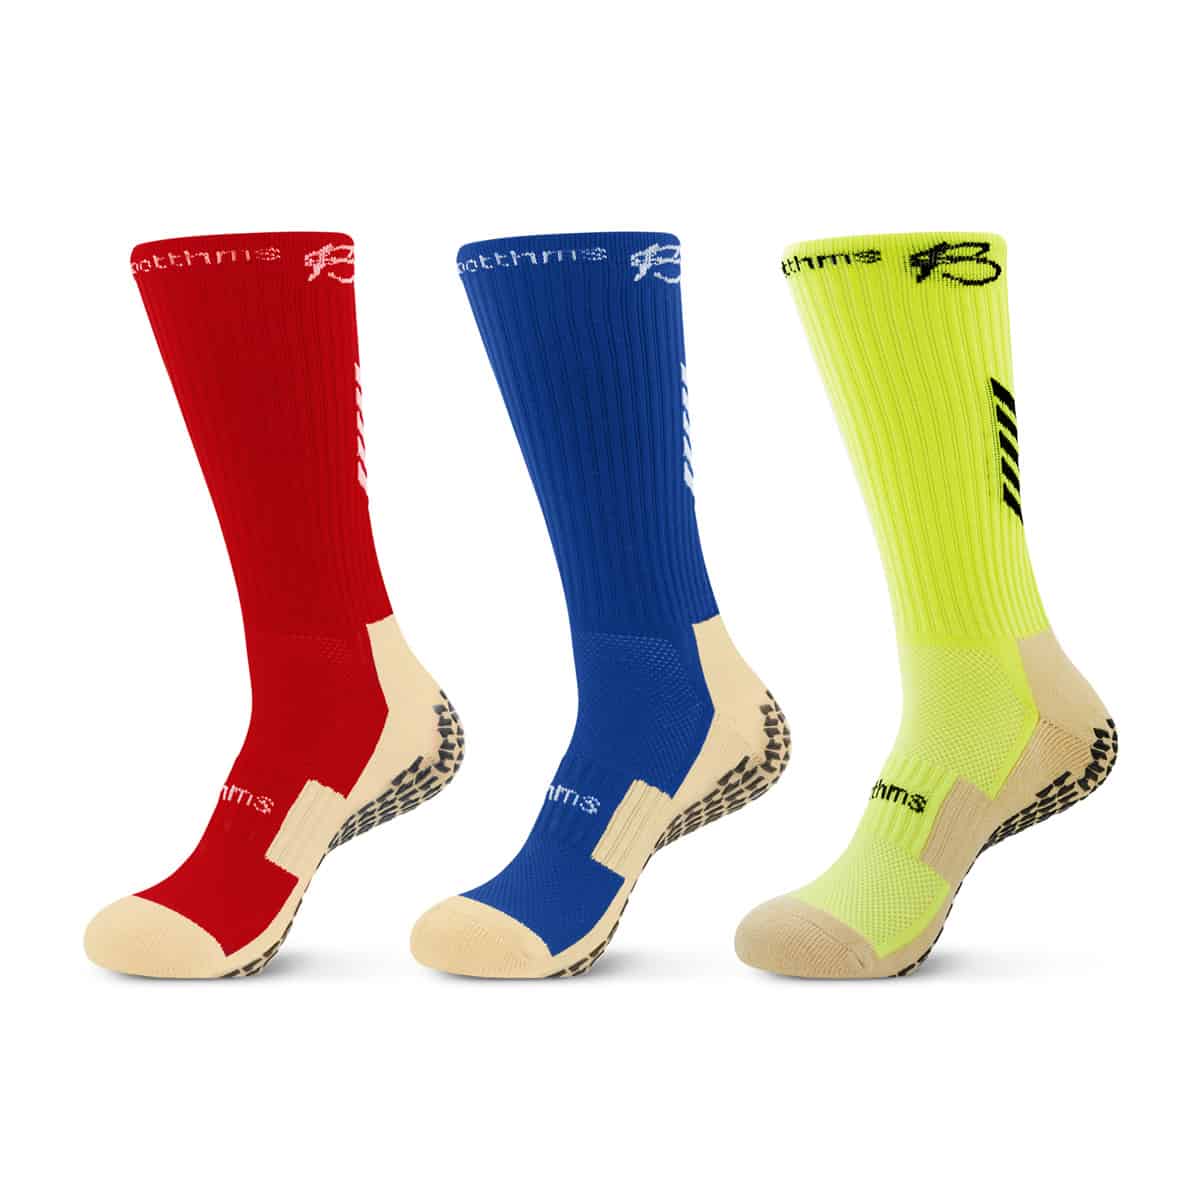 Grip Socks For Athletes Combo Pack - Shop Our Collection - Botthms